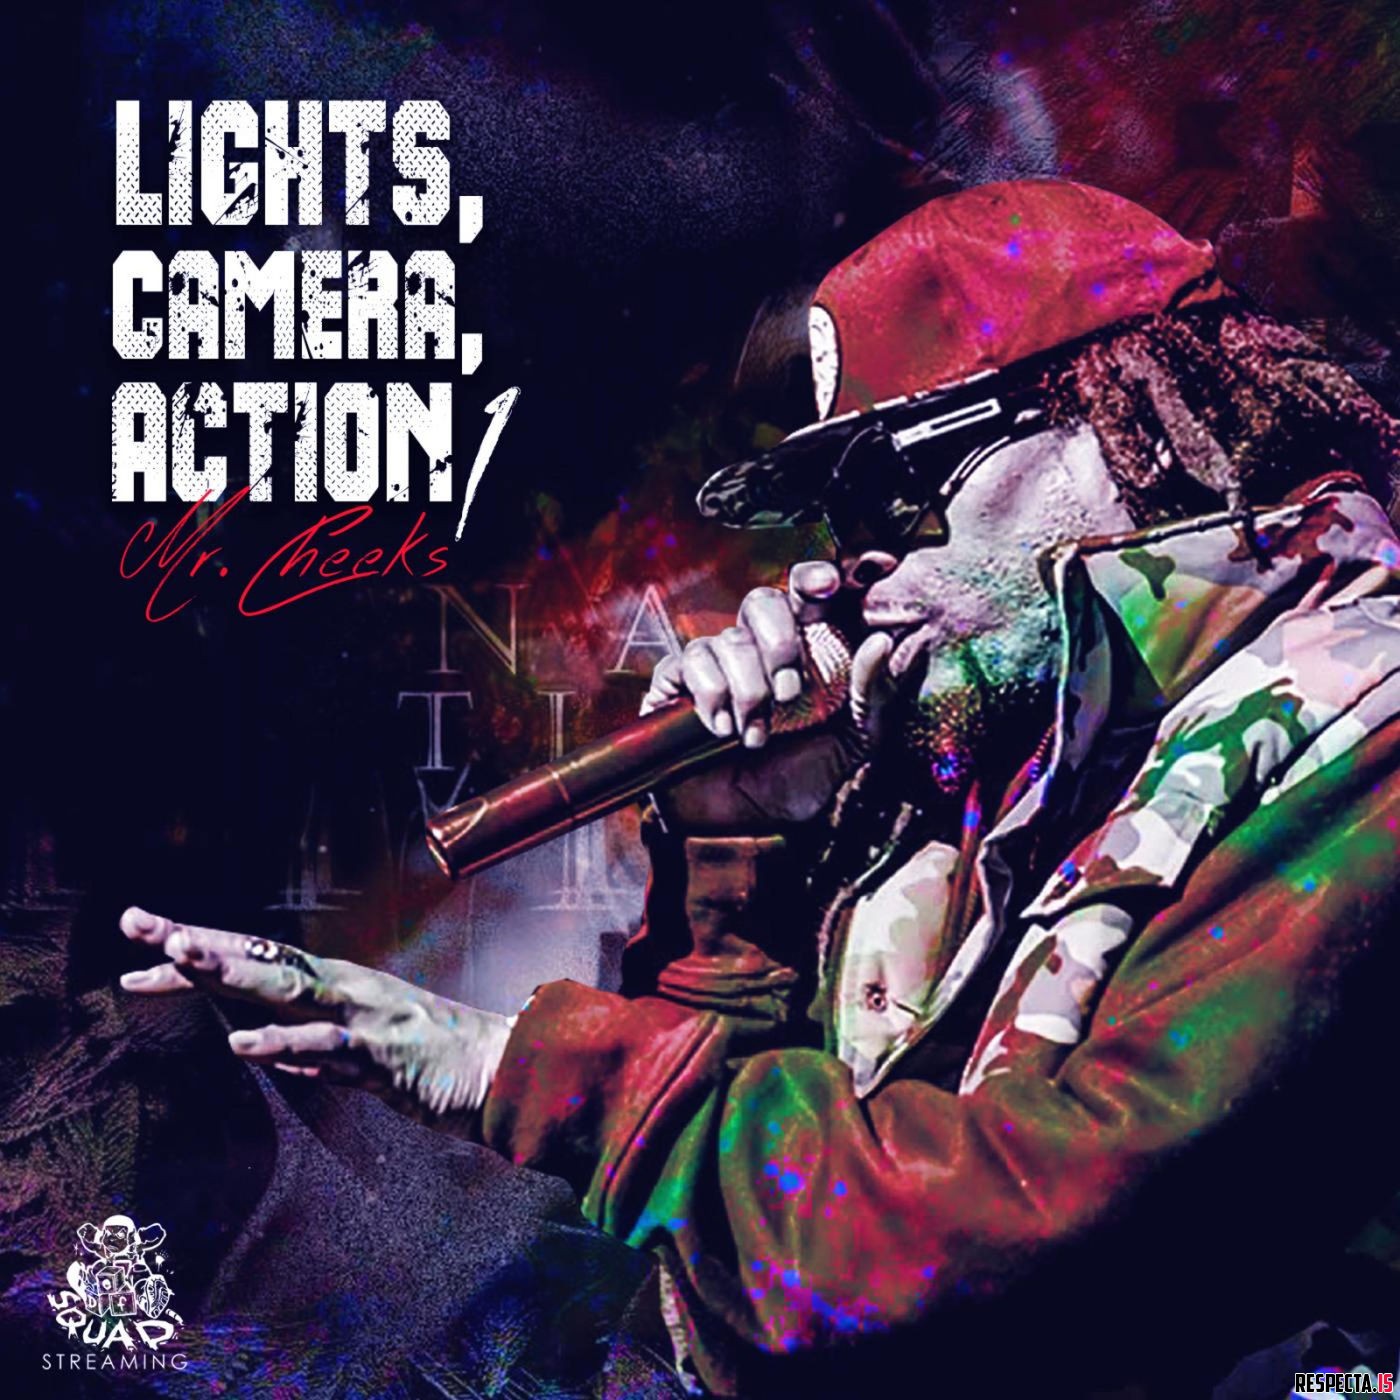 Mr. Cheeks - Lights, Camera, Action 1 » Respecta - The Ultimate Hip-Hop ...